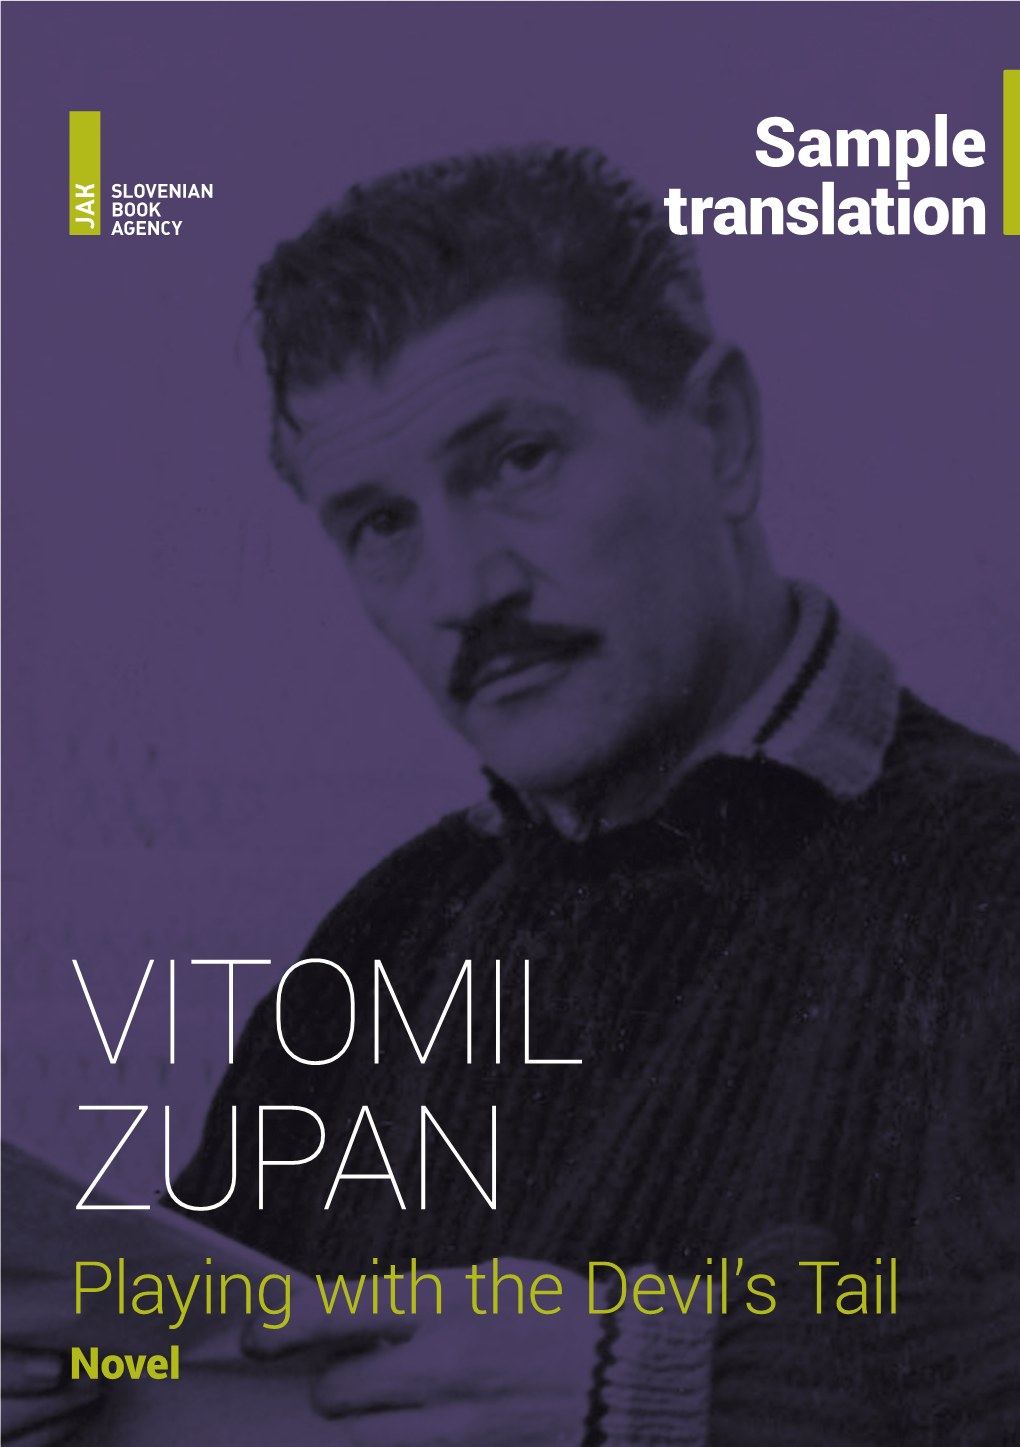 VITOMIL ZUPAN Playing with the Devil’S Tail Novel Vitomil Zupan – Playing with the Devil’S Tail Novel Sample Translation